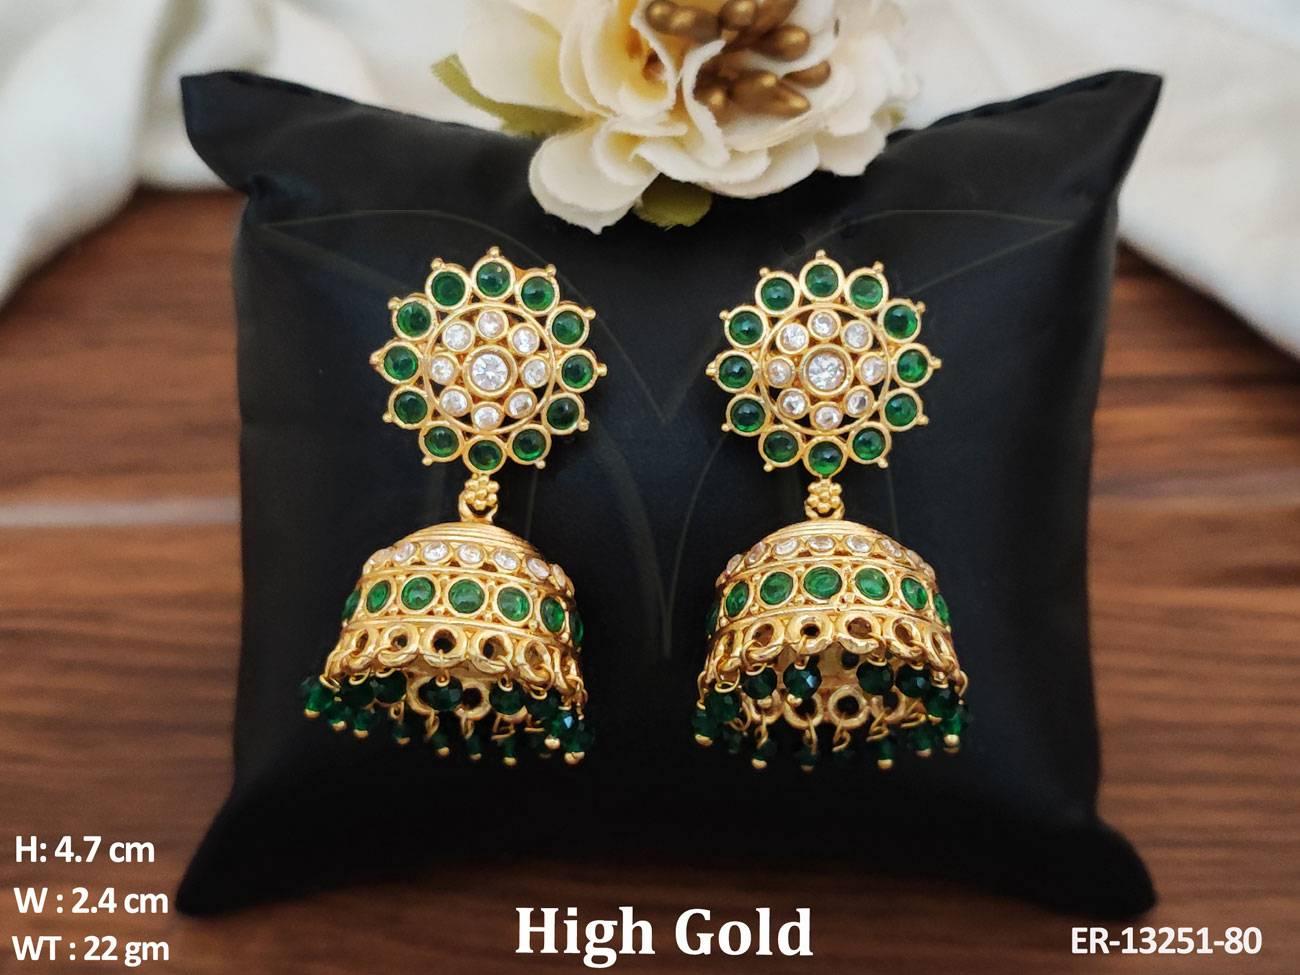 Antique Jhumka Earrings. Made with high-quality brass metal